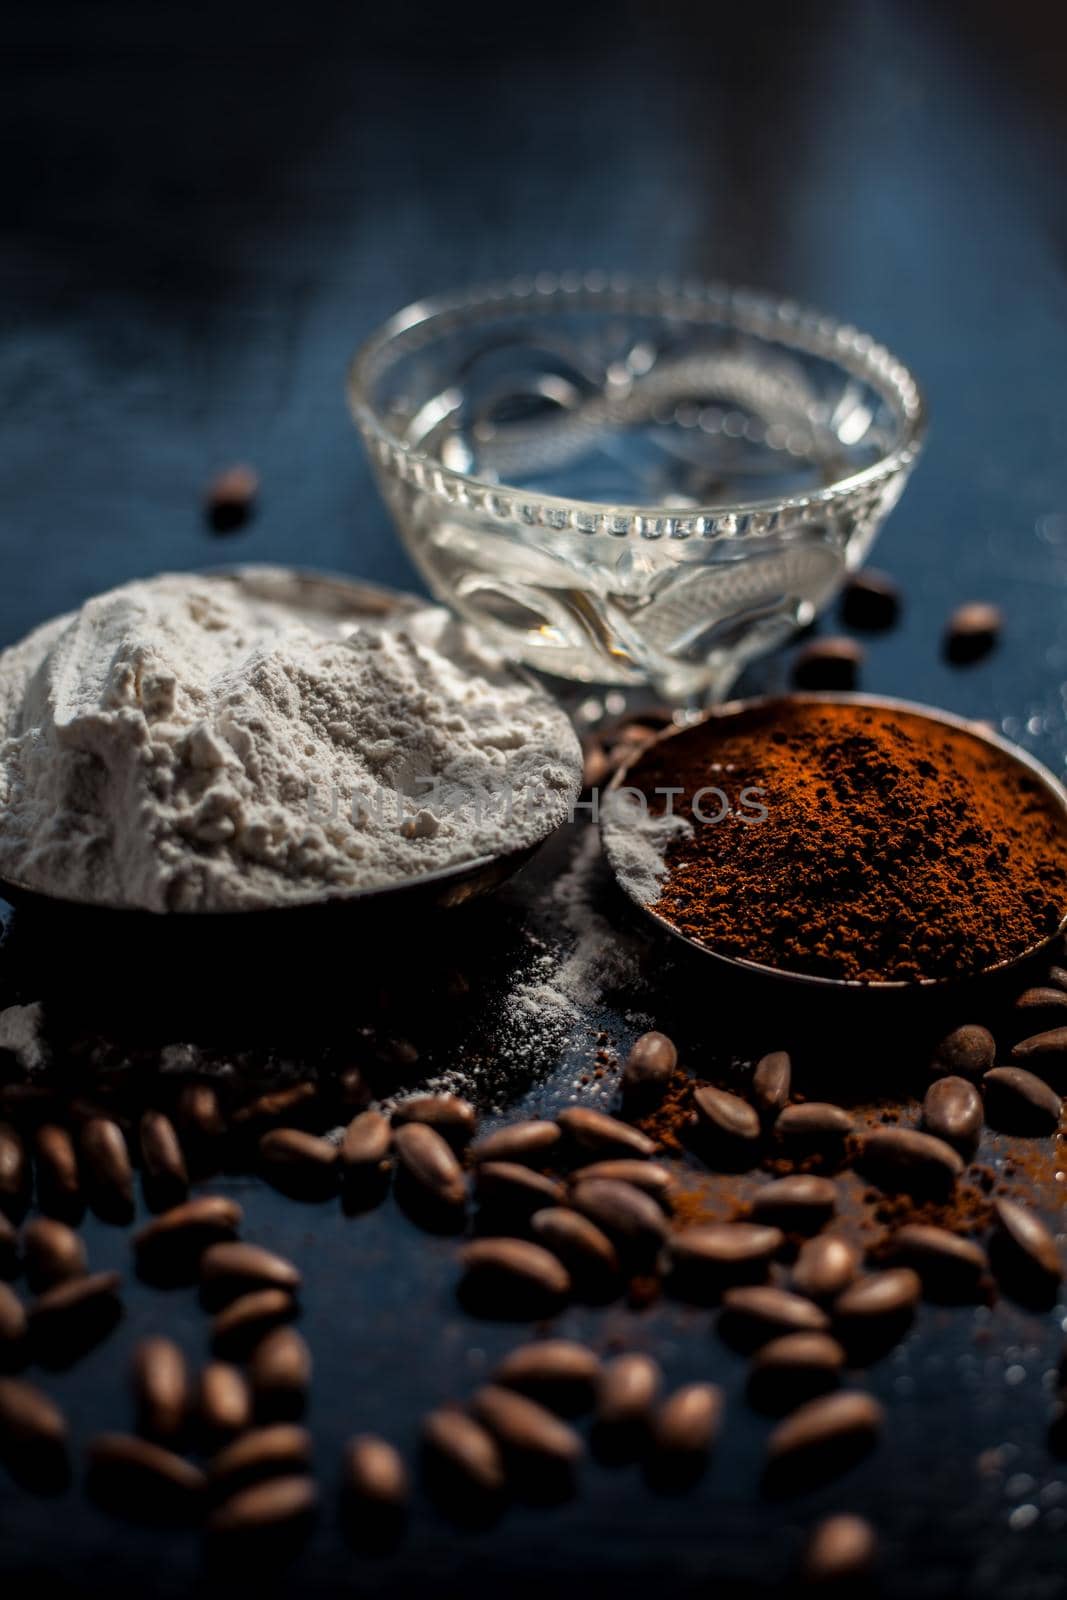 Coffee face mask for skin whitening on a black shiny wooden surface consisting of some coffee powder, lukewarm water, and rice flour. by mirzamlk